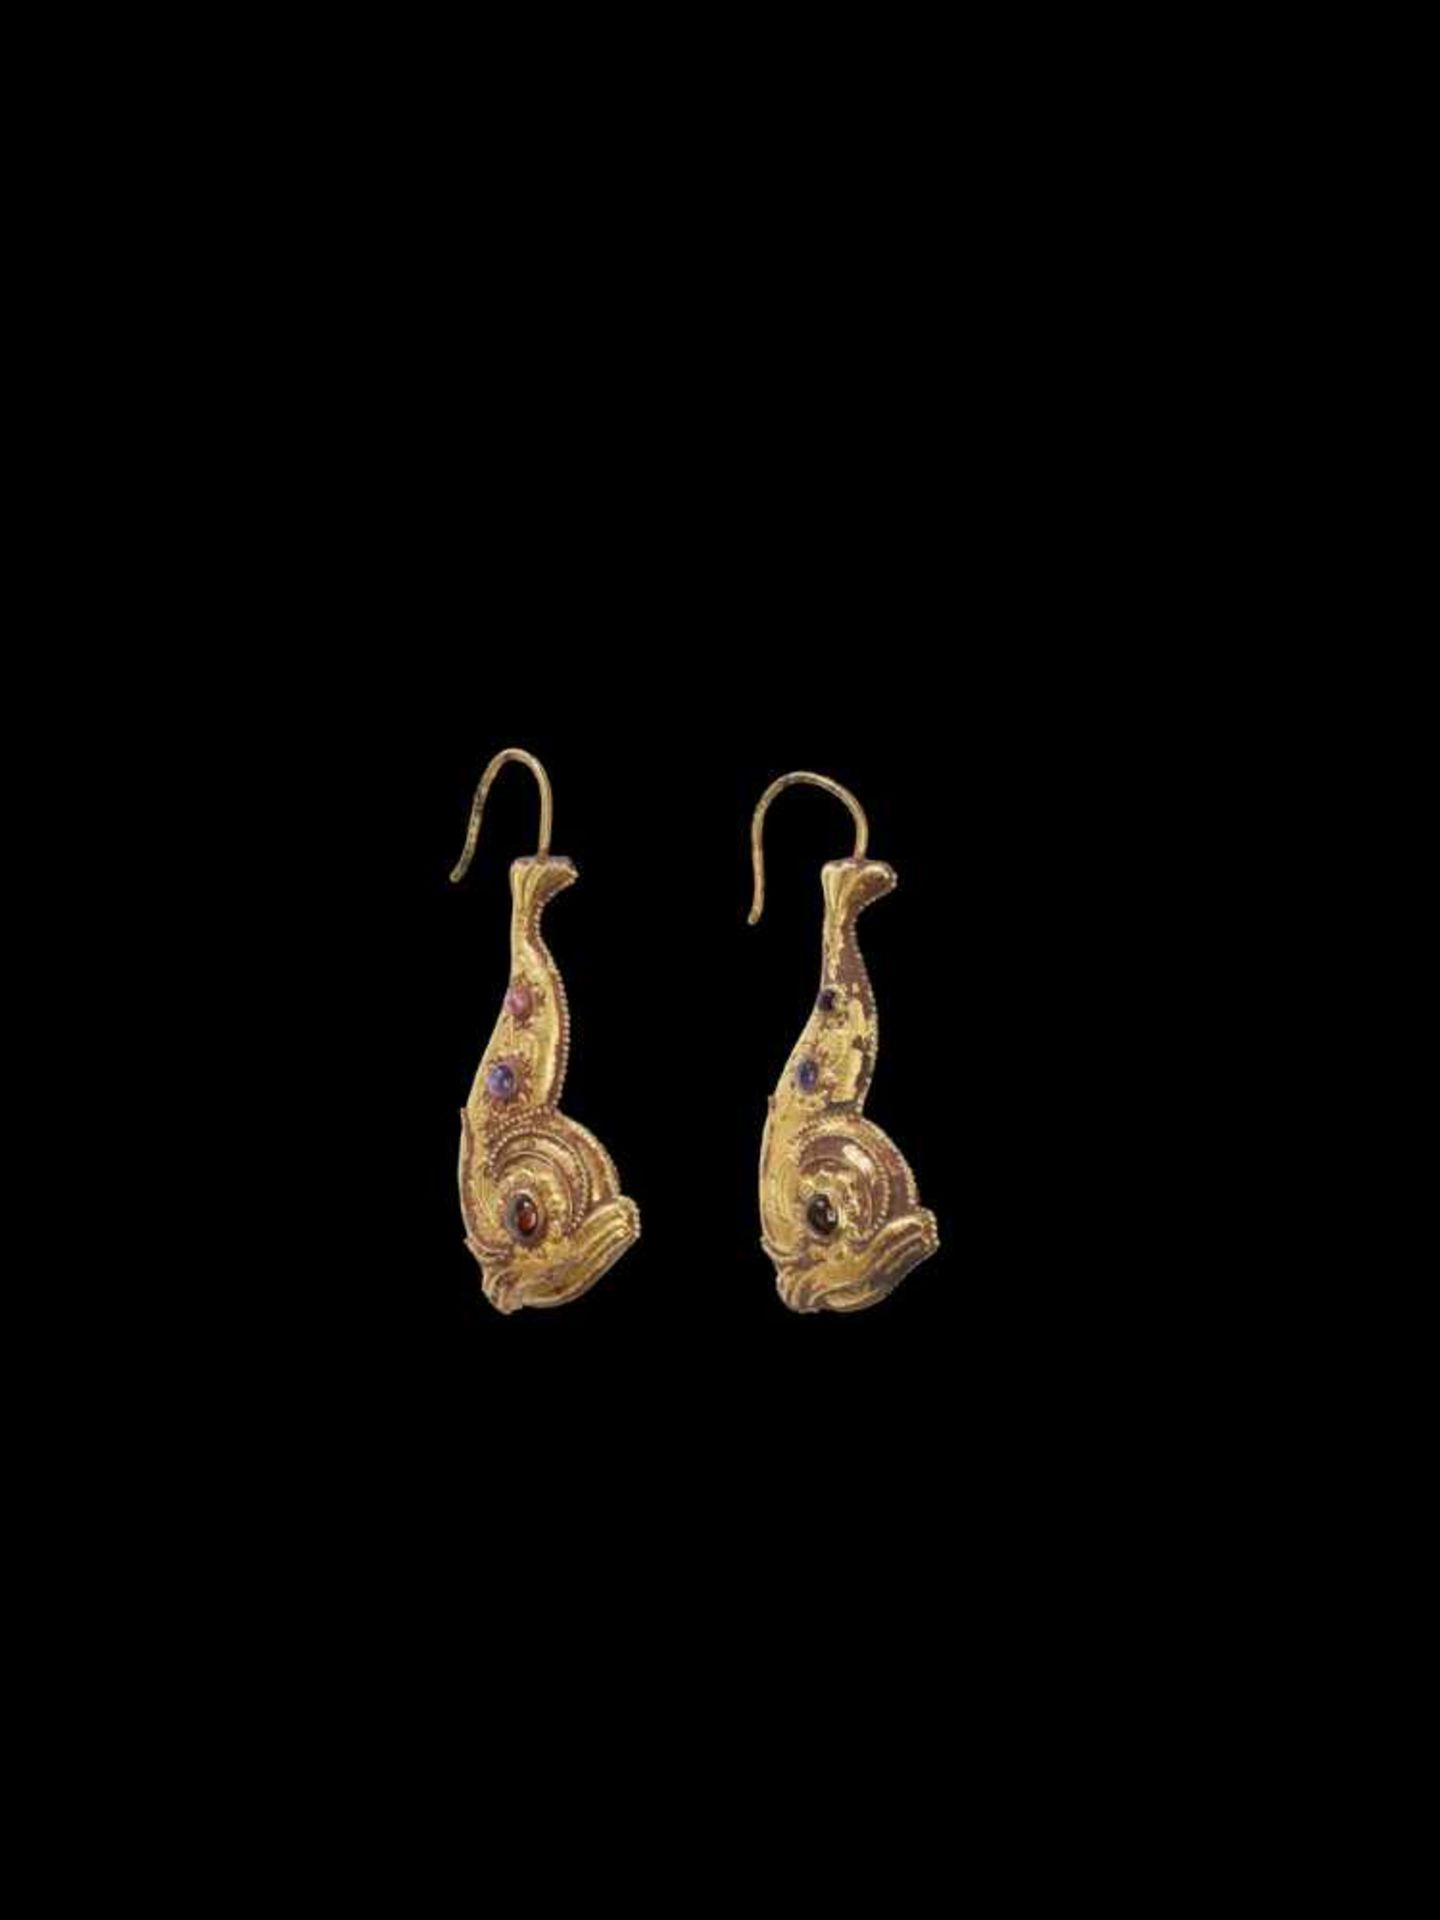 A PAIR OF CHAM REPOUSSÉ GOLD EAR ORNAMENTS Champa, c. 10th century. The earrings crafted in the form - Bild 5 aus 6